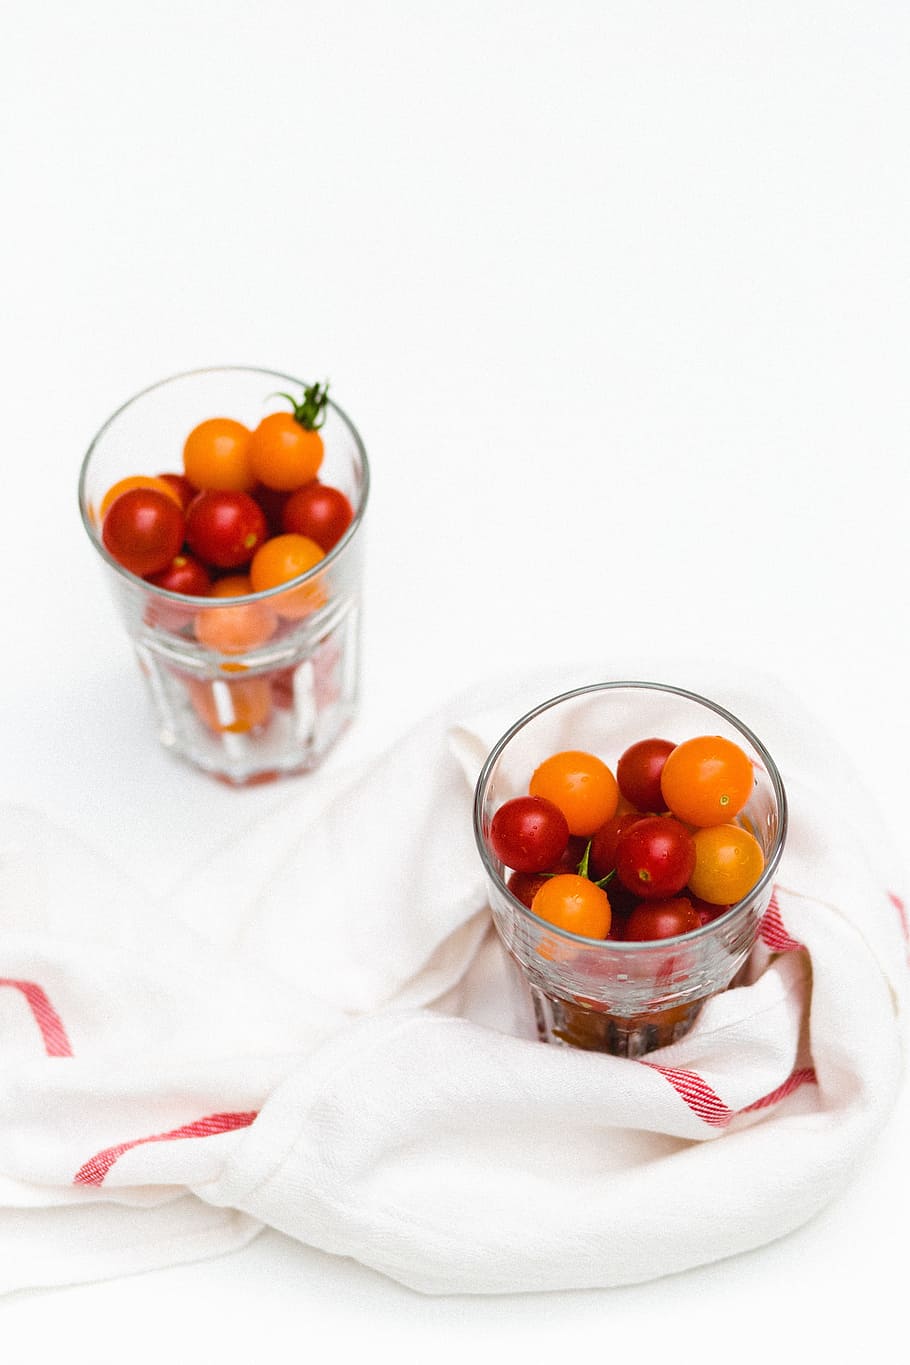 tomatoes, cherry tomato, glass, red, tomto, vegetable, vegetables, white, fruit, food